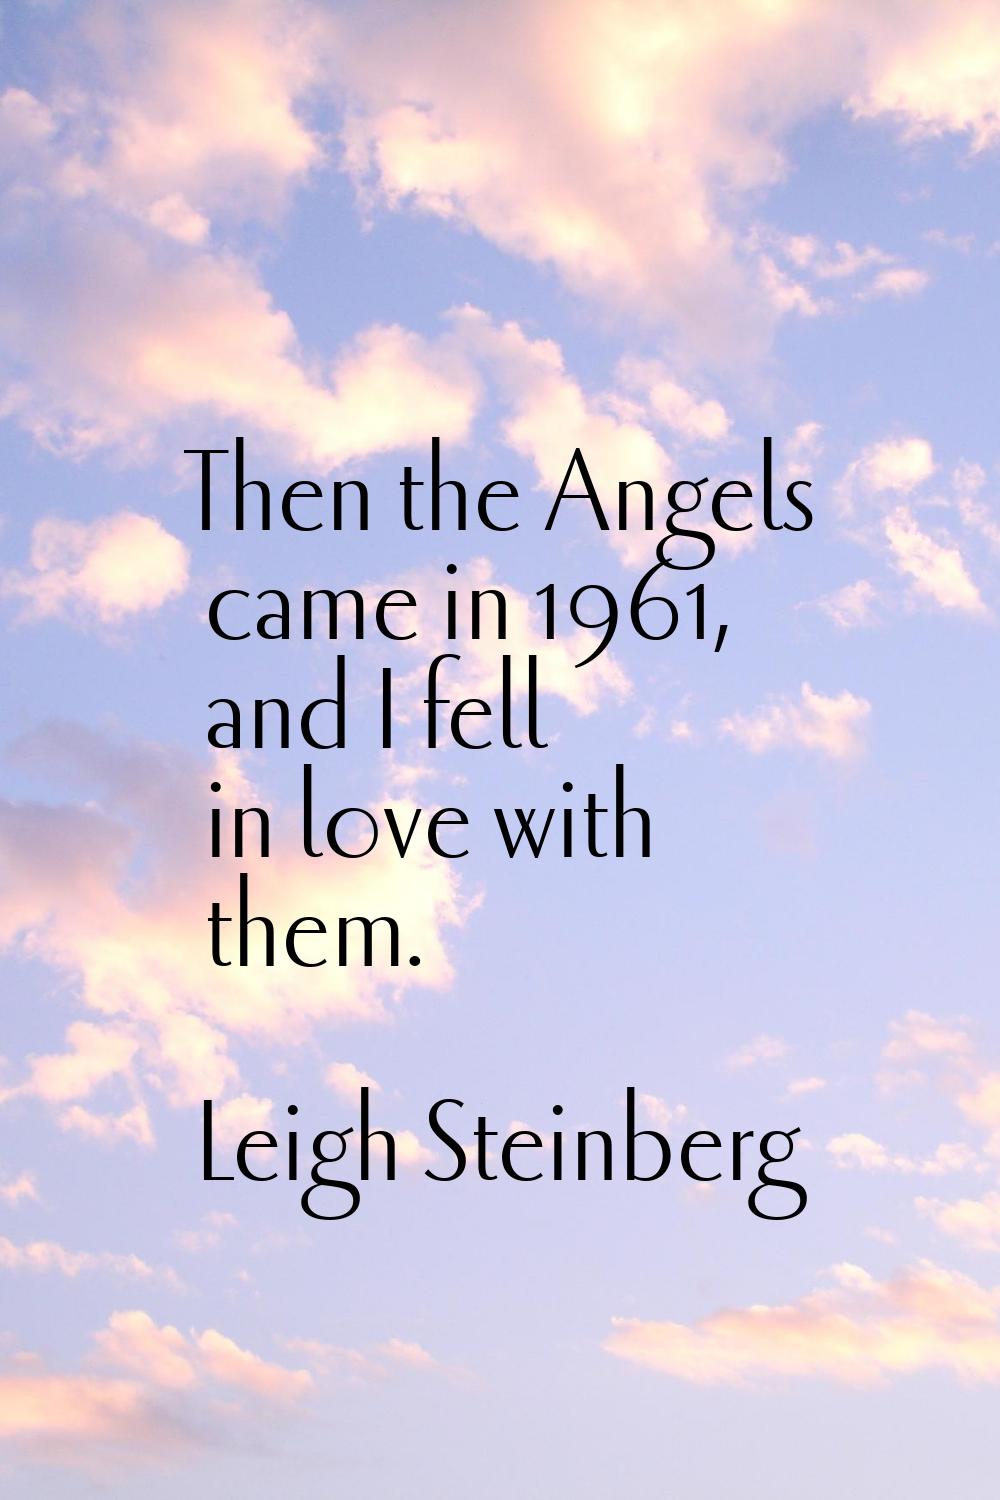 Then the Angels came in 1961, and I fell in love with them.